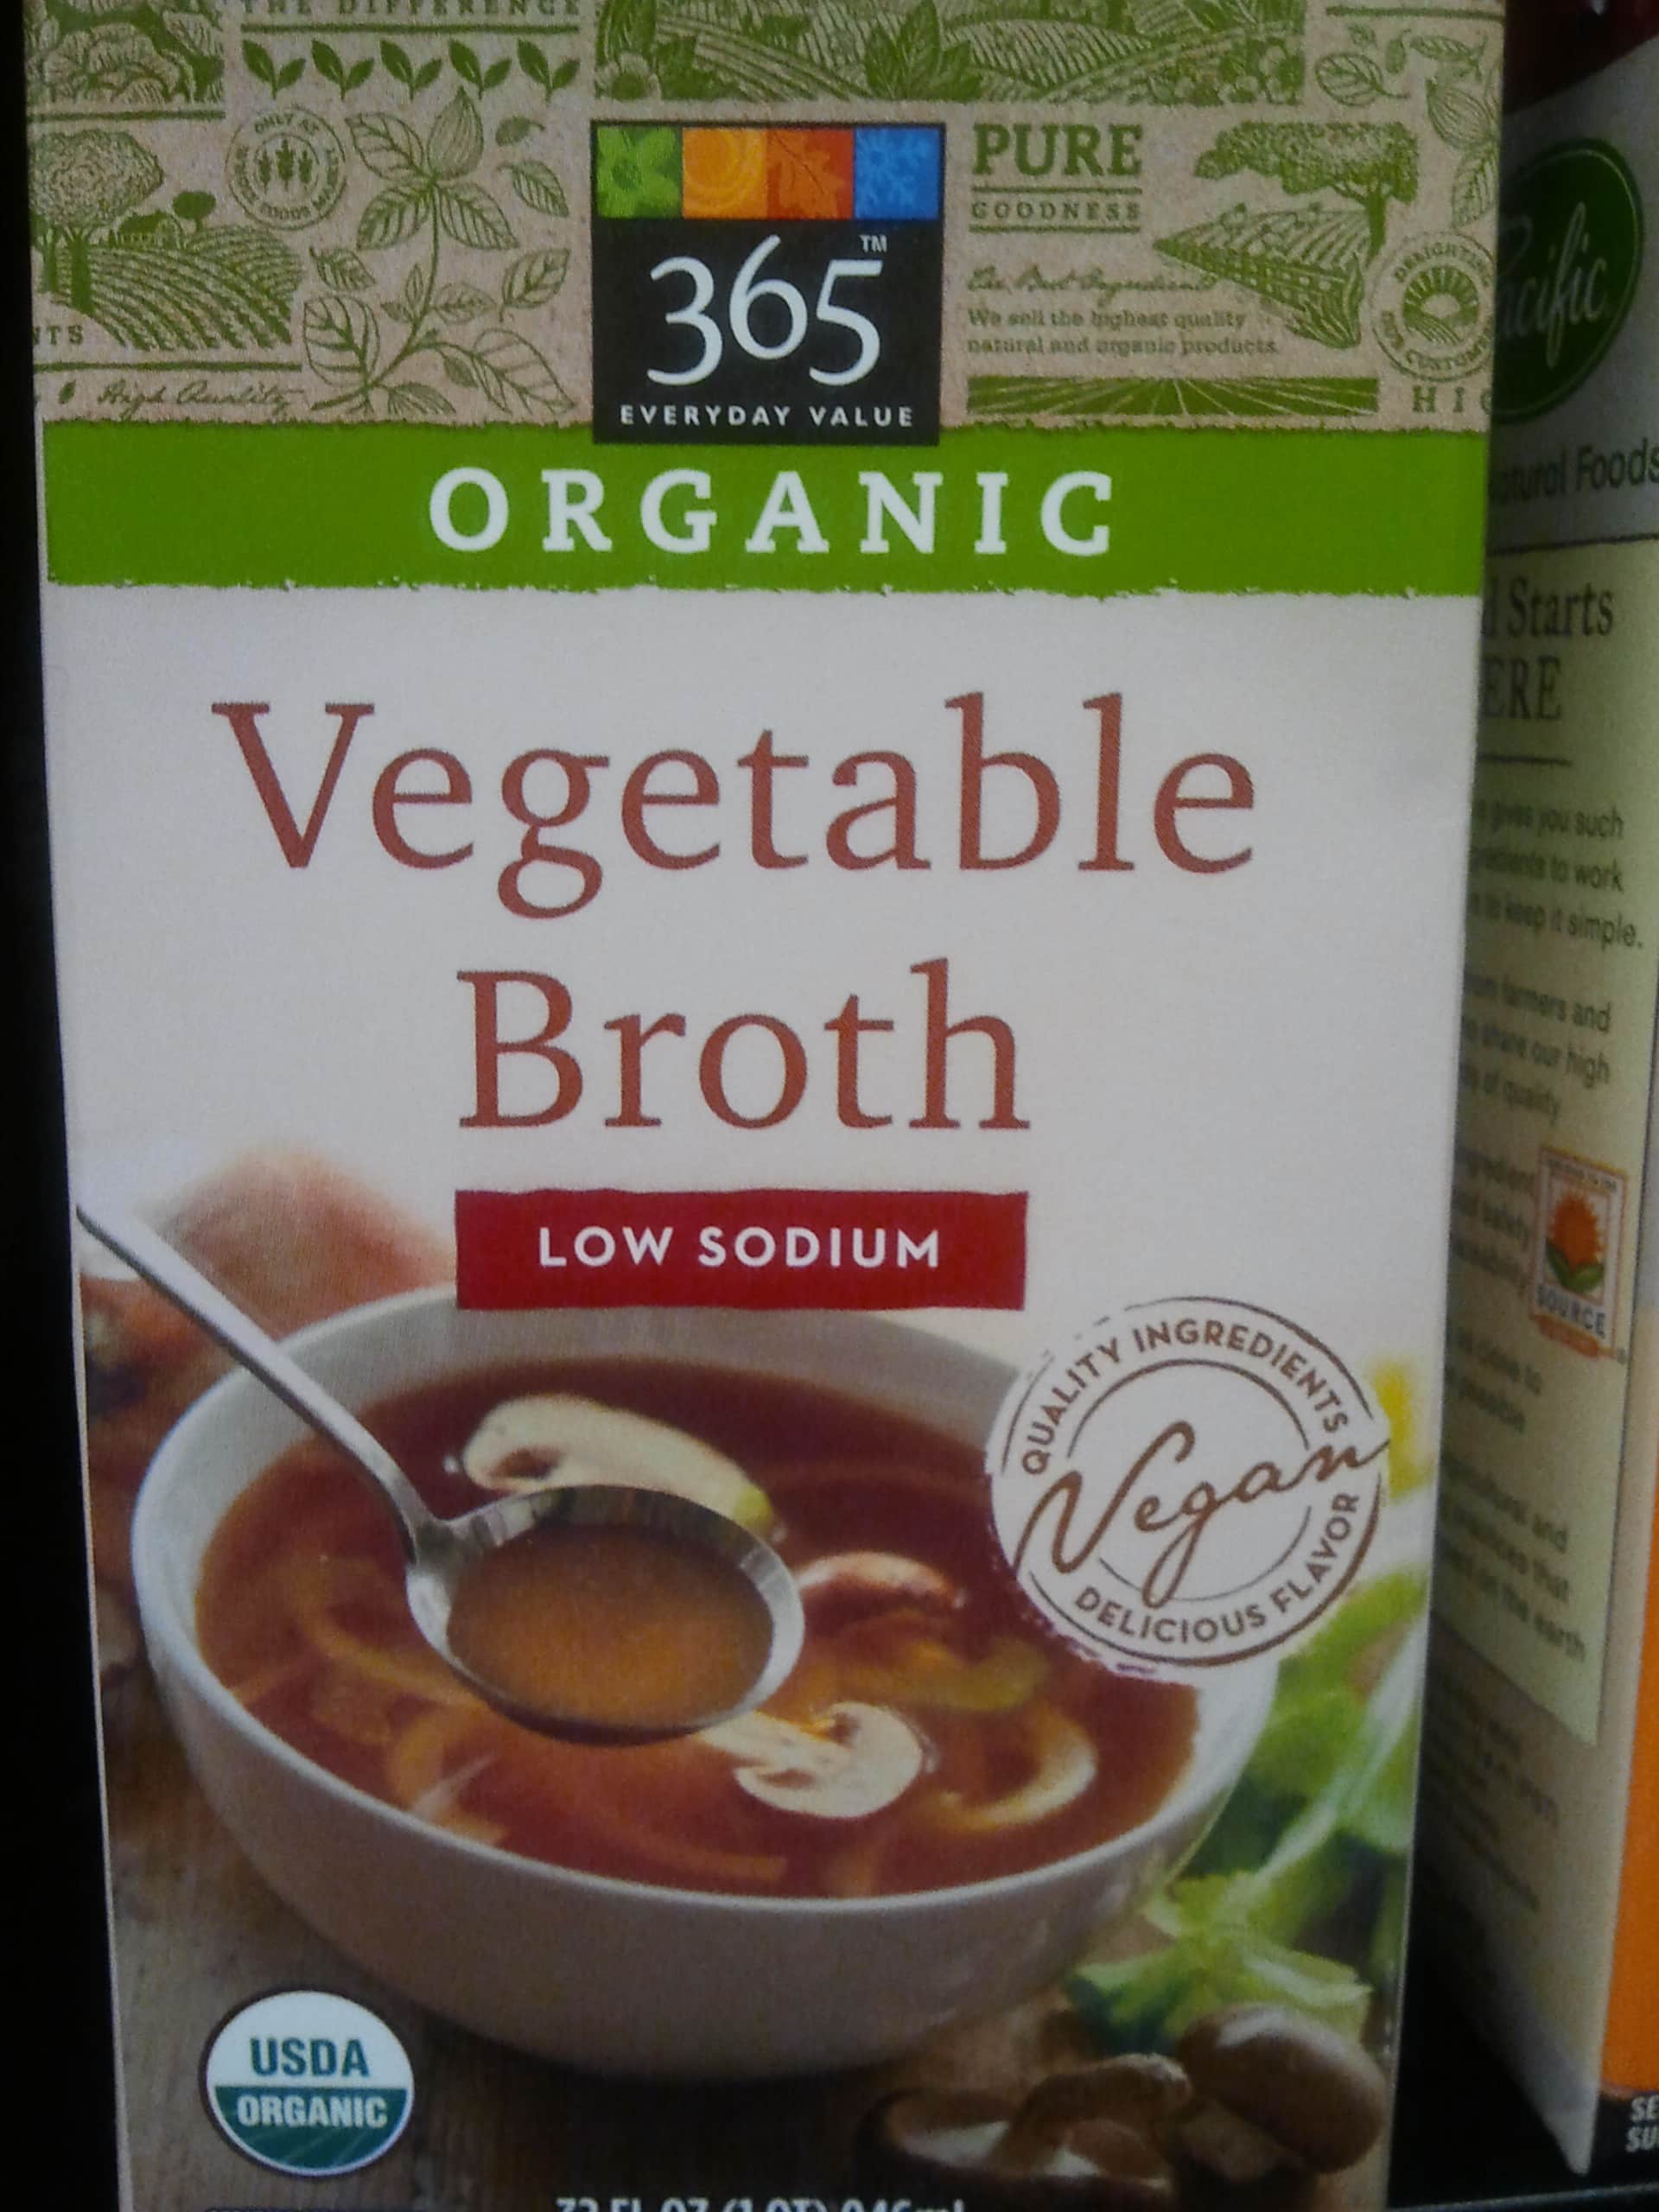 Hearty Vegetable Soup at Whole Foods Market